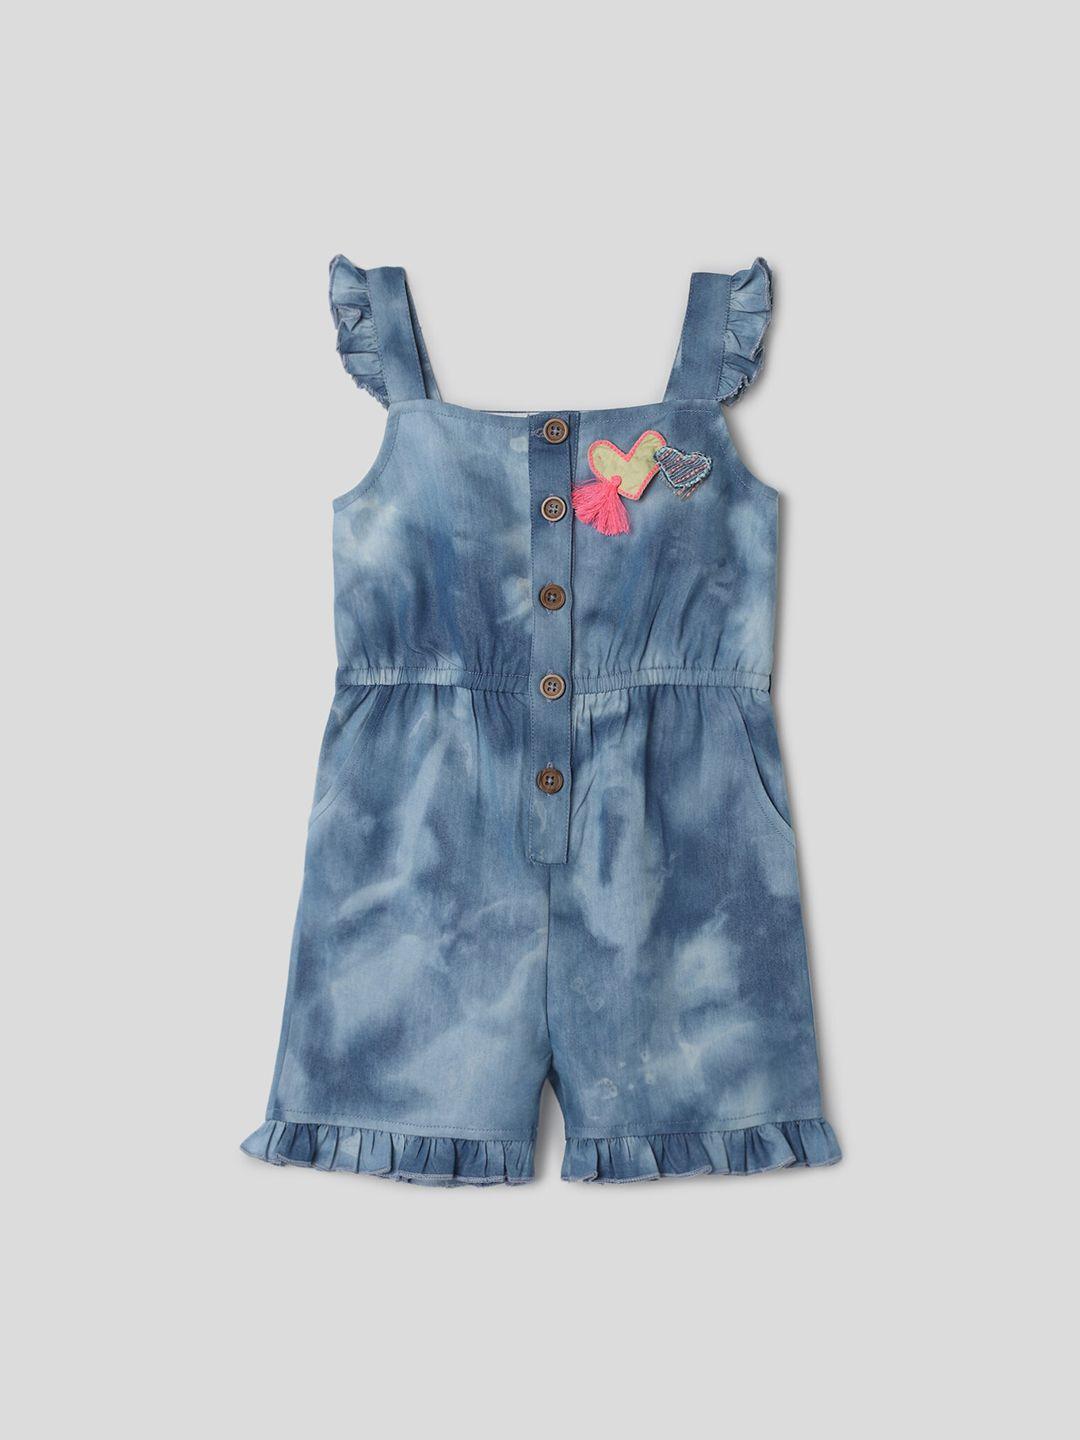 somersault-girls-embroidered-tie-&-dye-pure-cotton-rompers